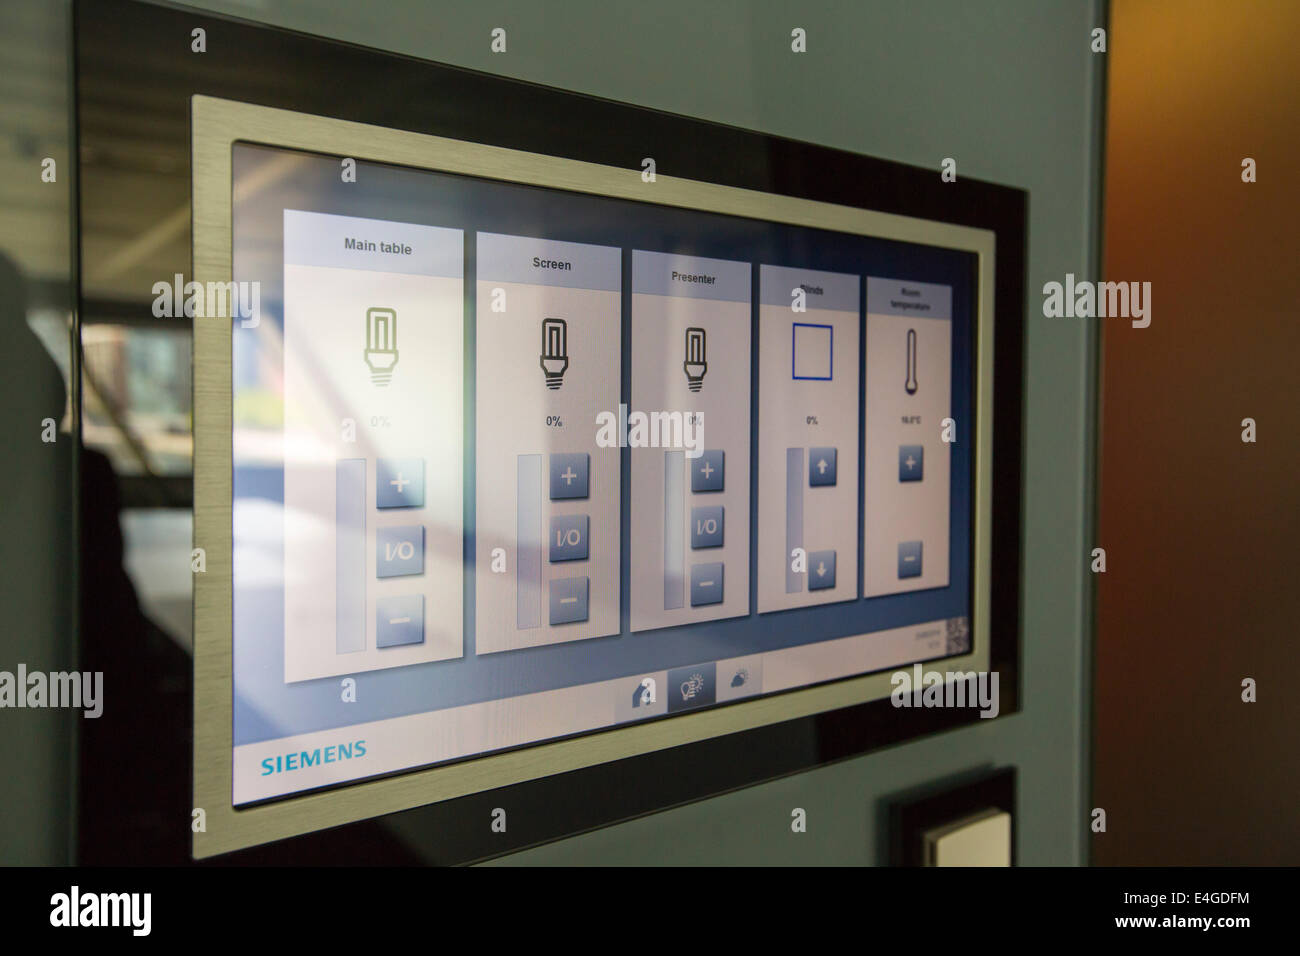 A room control panel in the Crystal building which is the first building in the world to be awarded an outstanding BREEAM (BRE Environmental Assessment Method) rating and a LEED (Leadership in Energy and Environmental Design) platinum rating. London, UK. Stock Photo